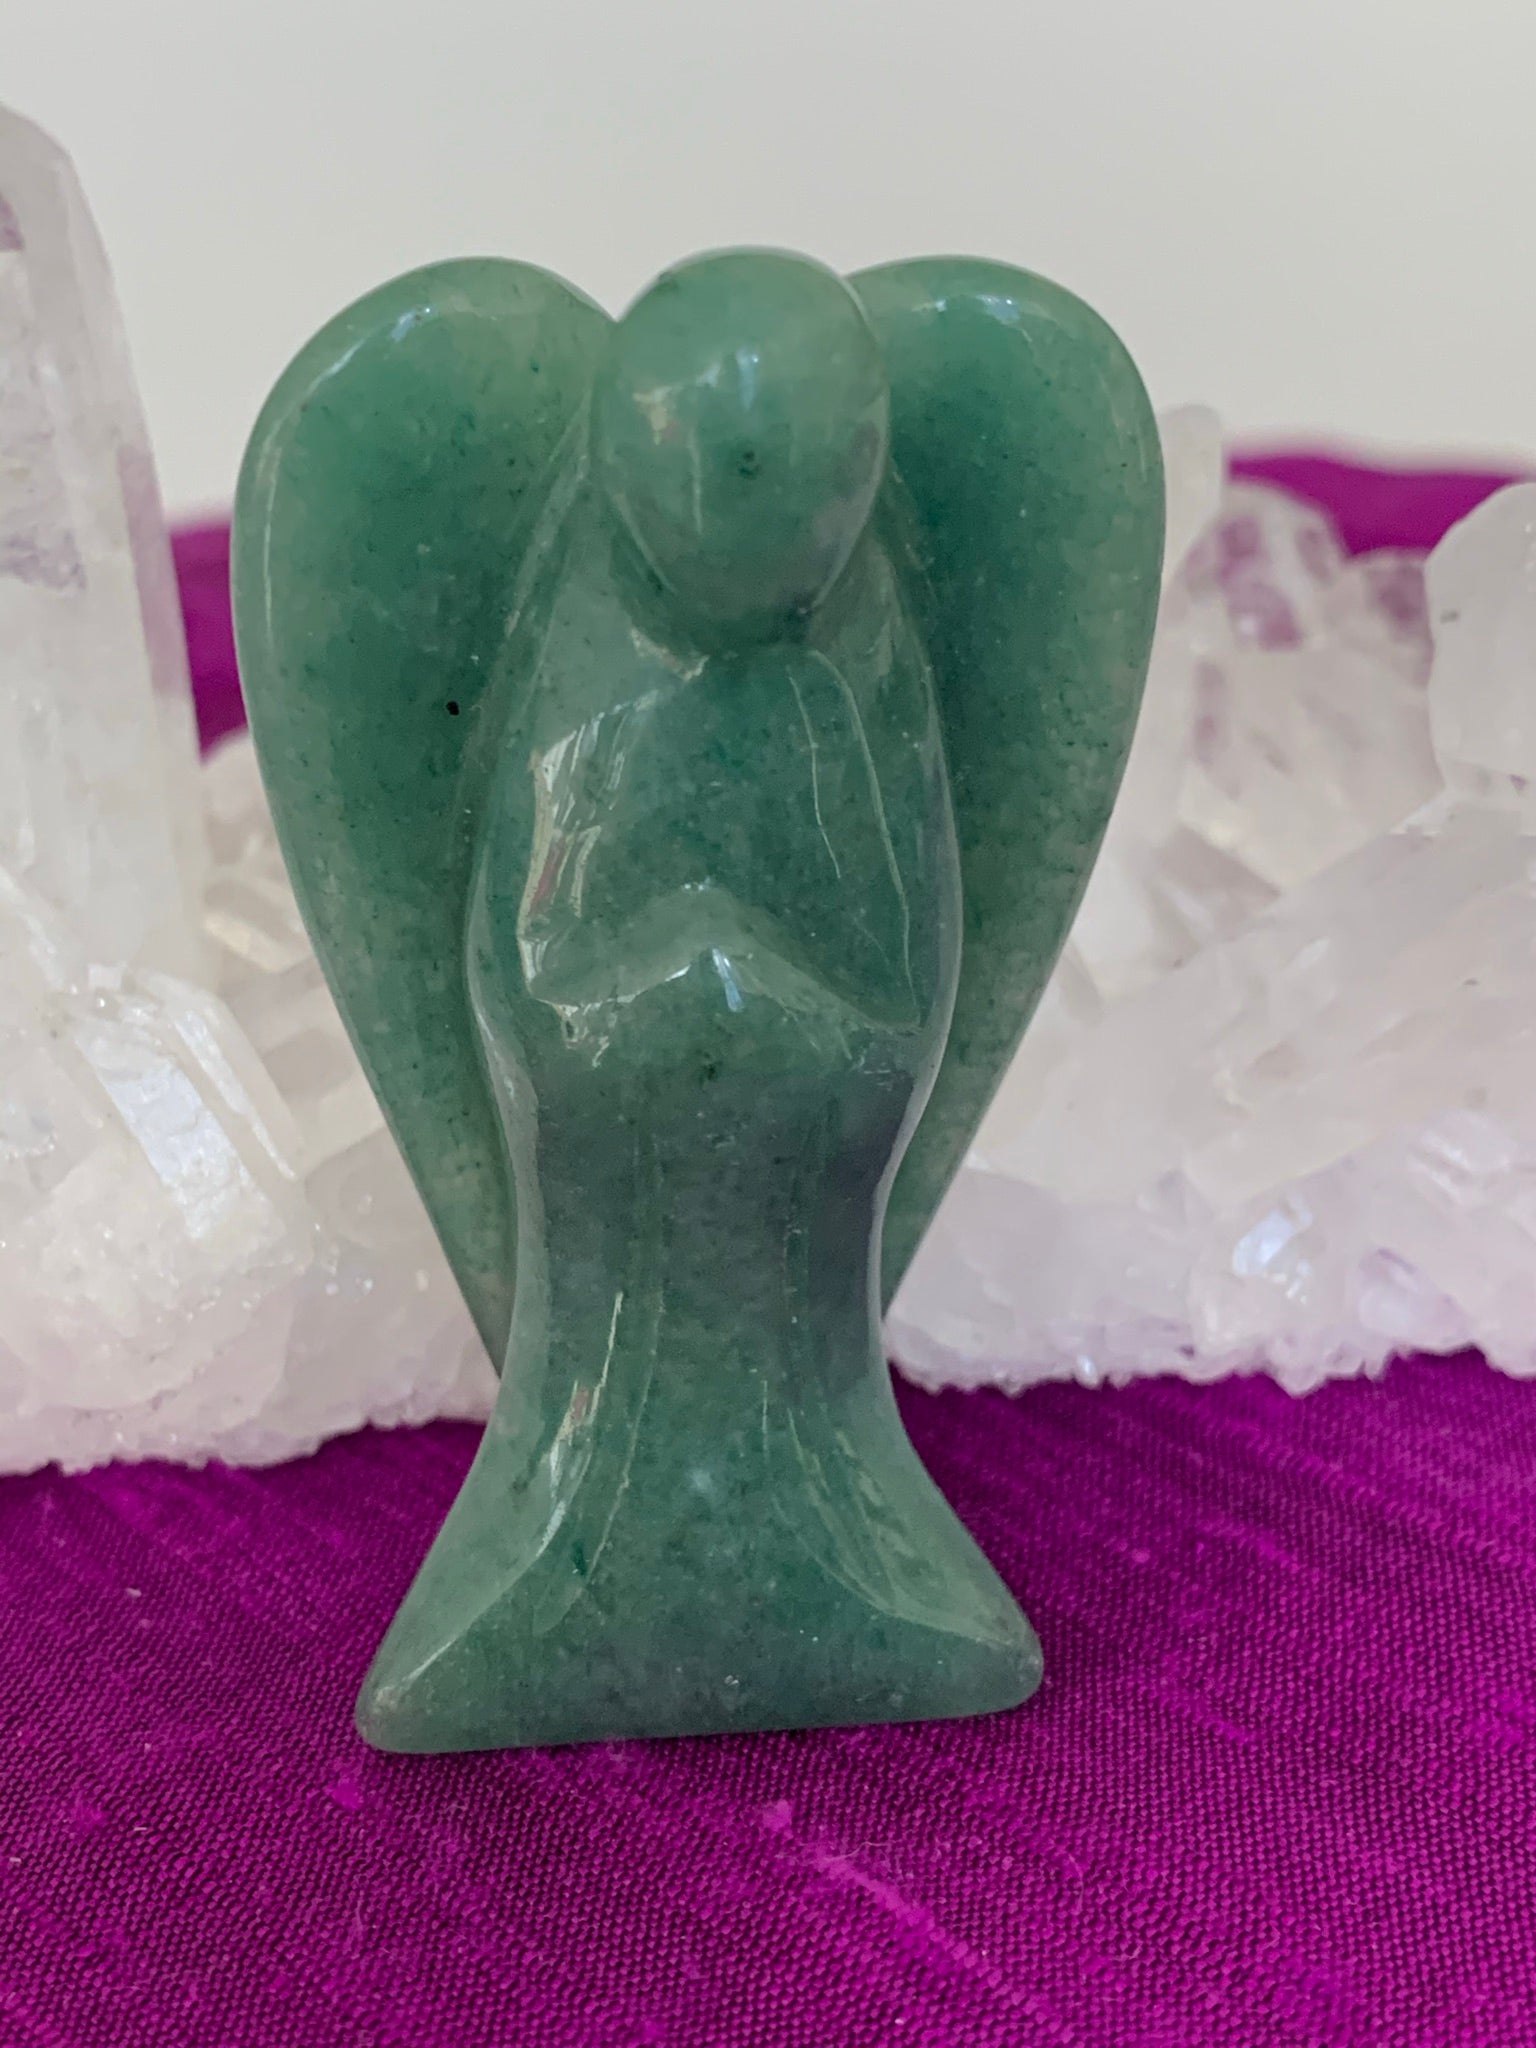  Another close-up front view. Lovely Aventurine angel is perfect for your altar, meditation space, to hold while meditating, or anywhere you want to radiate the energy of prosperity & compassion. ♥. A great gift too! Aventurine is a stone of prosperity (another crystal I used to keep in my cash register :). It is also associated with leadership & decisiveness. It promotes compassion and empathy and helps in emotional recovery. Physically, it is said to relieve migraines and allergies. Approximately 2" tall.